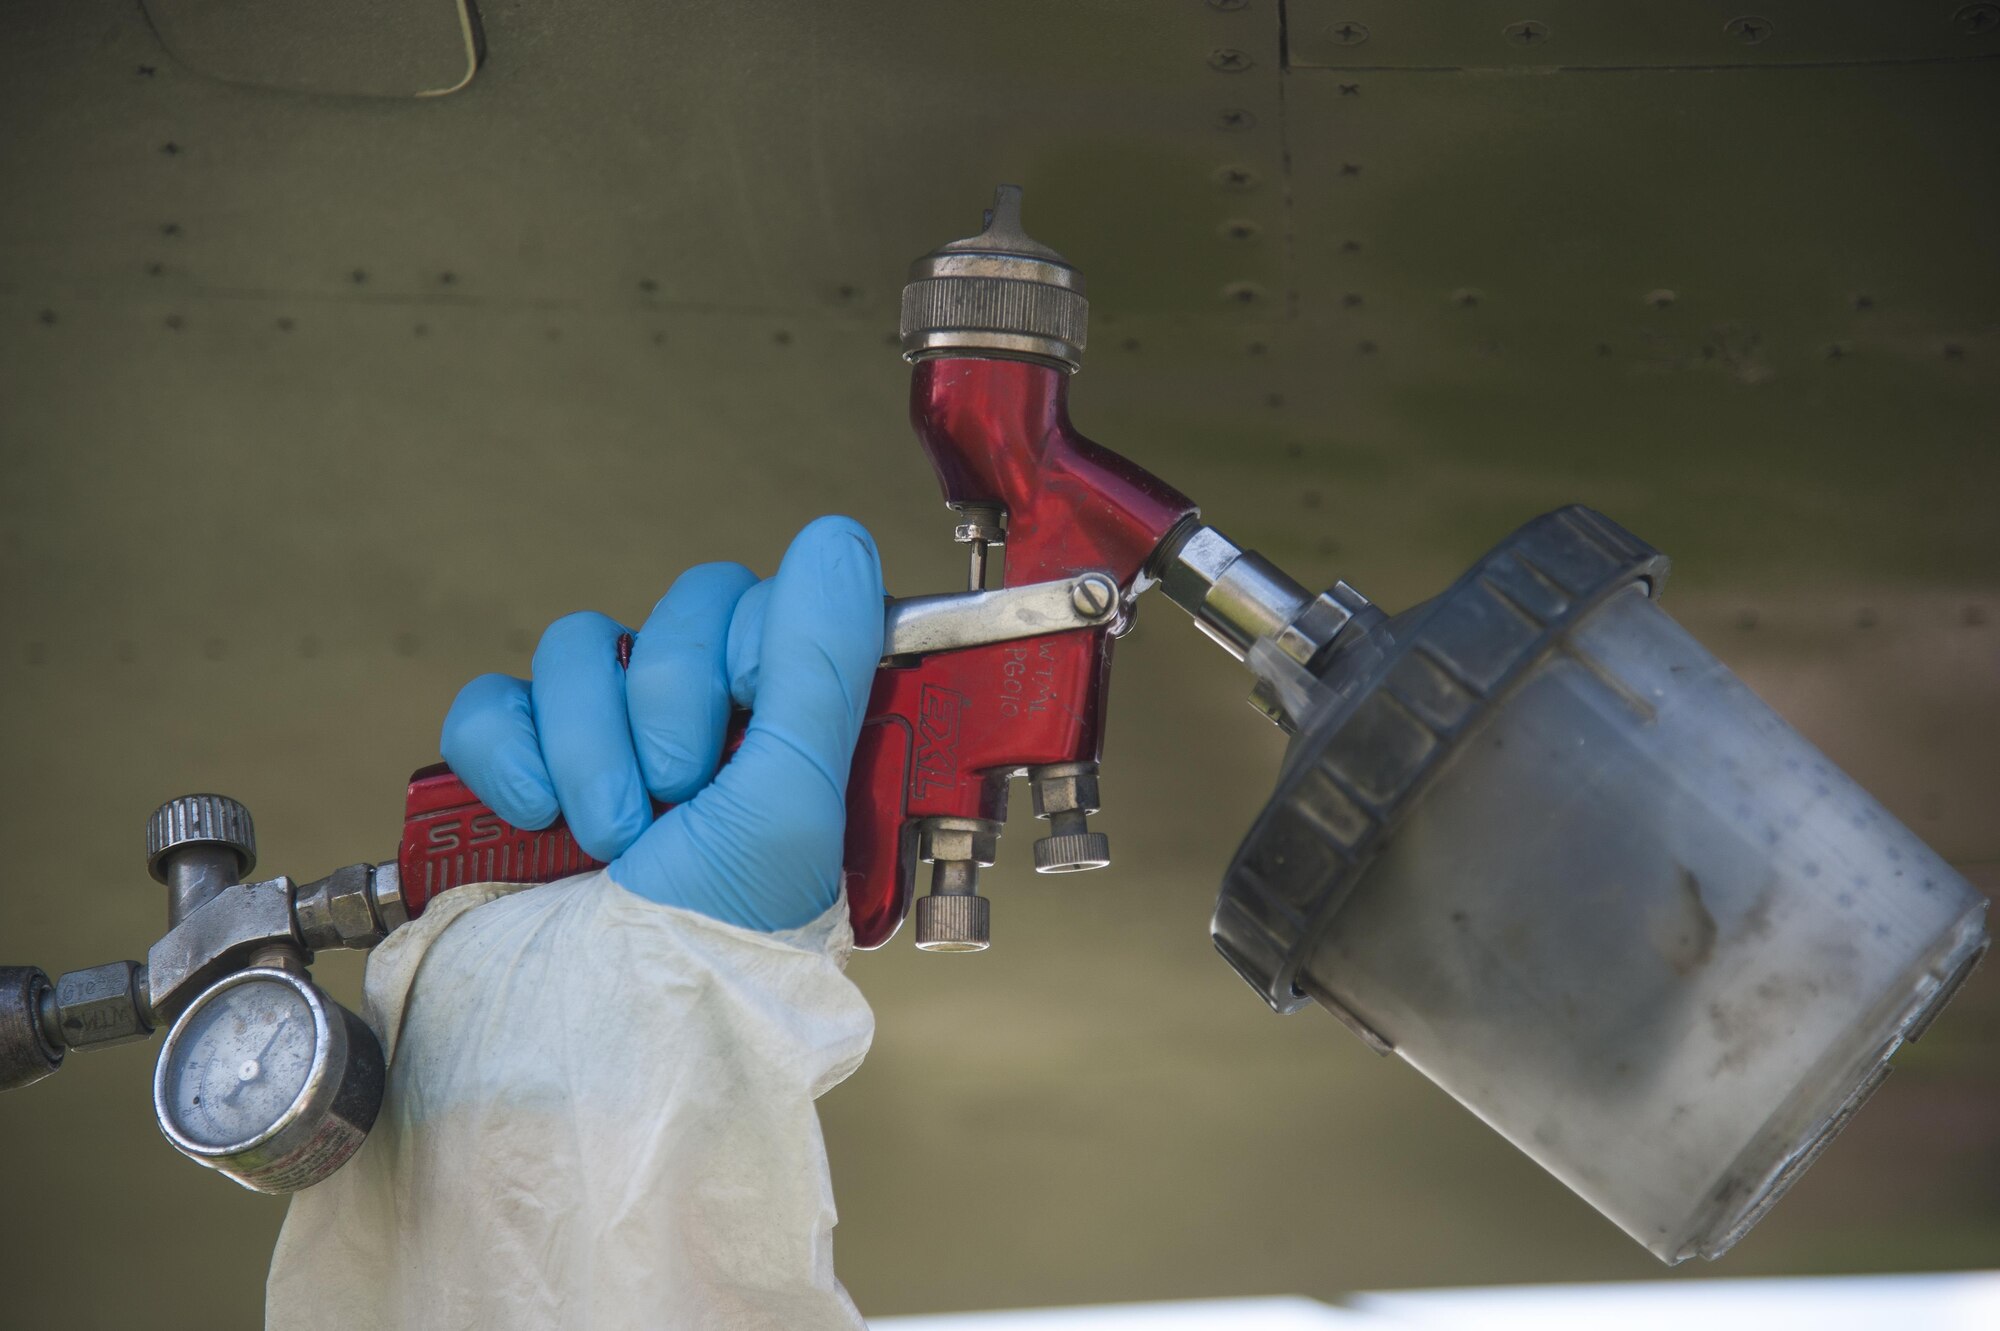 A low observable technician from the 509th Maintenance Squadron sprays a coating of paint on an FB-111A General Dynamics Aardvark static display at Whiteman Air Force Base, Mo., Sept. 13, 2016. After previously being painted solid gray, the aircraft will now have a “dark vark” scheme of dark green and gray. (U.S. Air Force photo by Senior Airman Joel Pfiester)